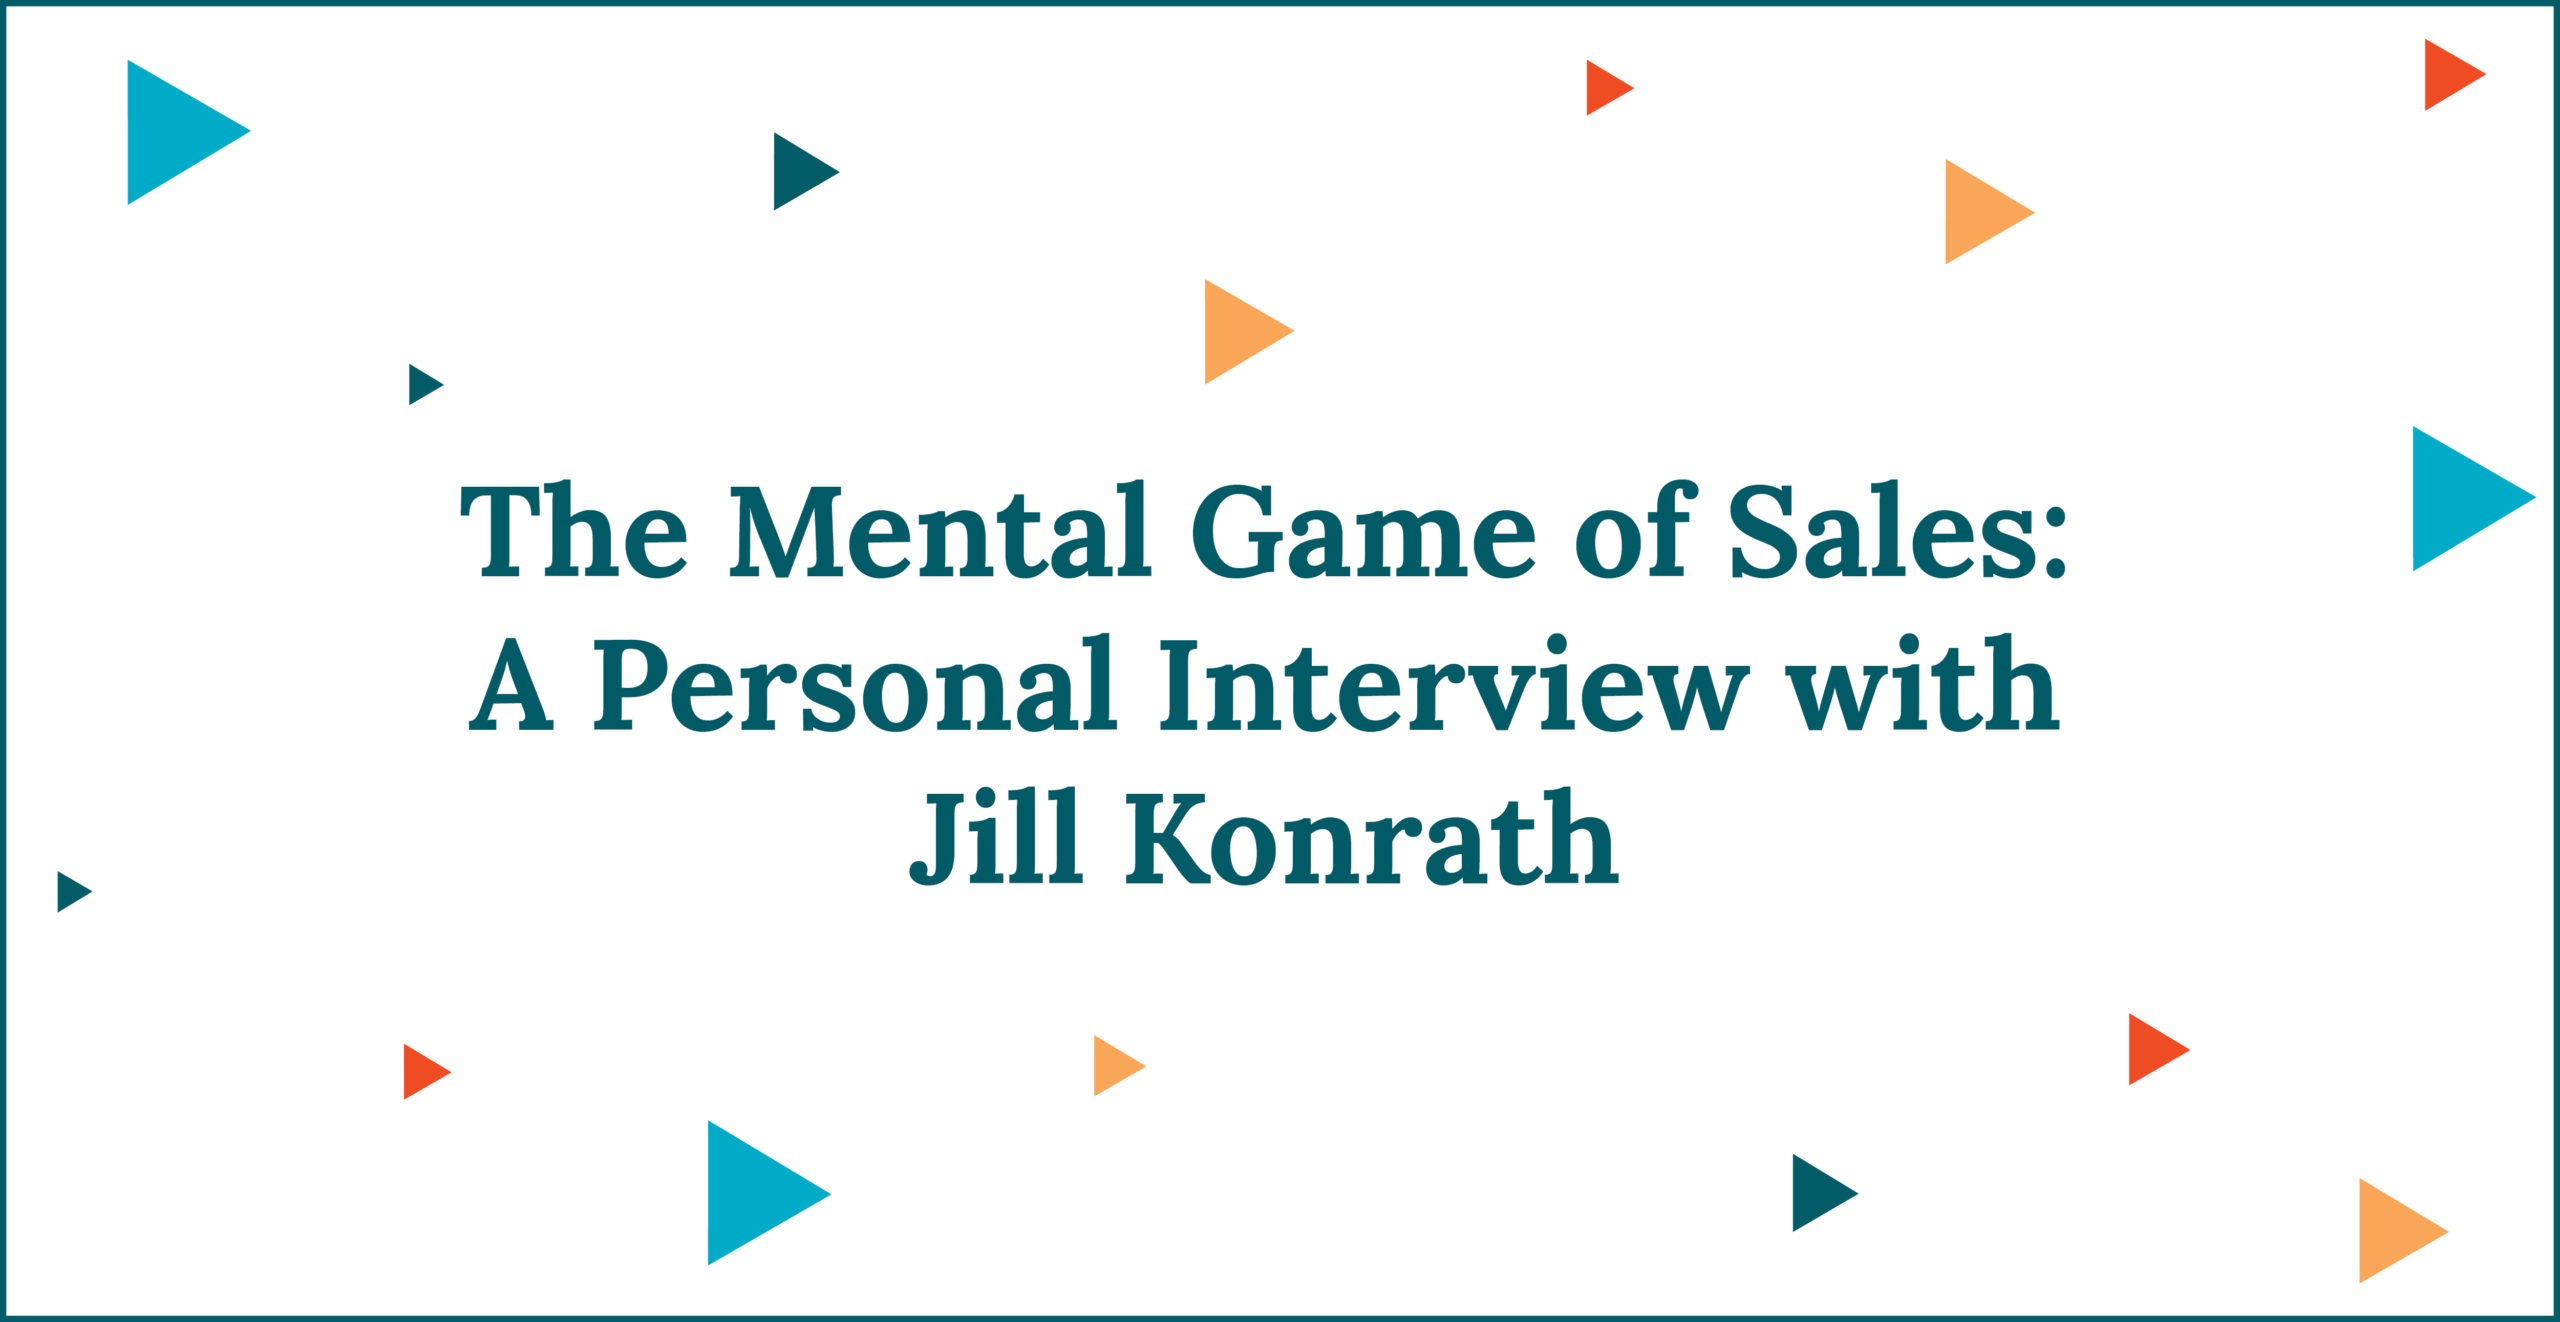 The Mental Game of Sales: A Personal Interview with Jill Konrath